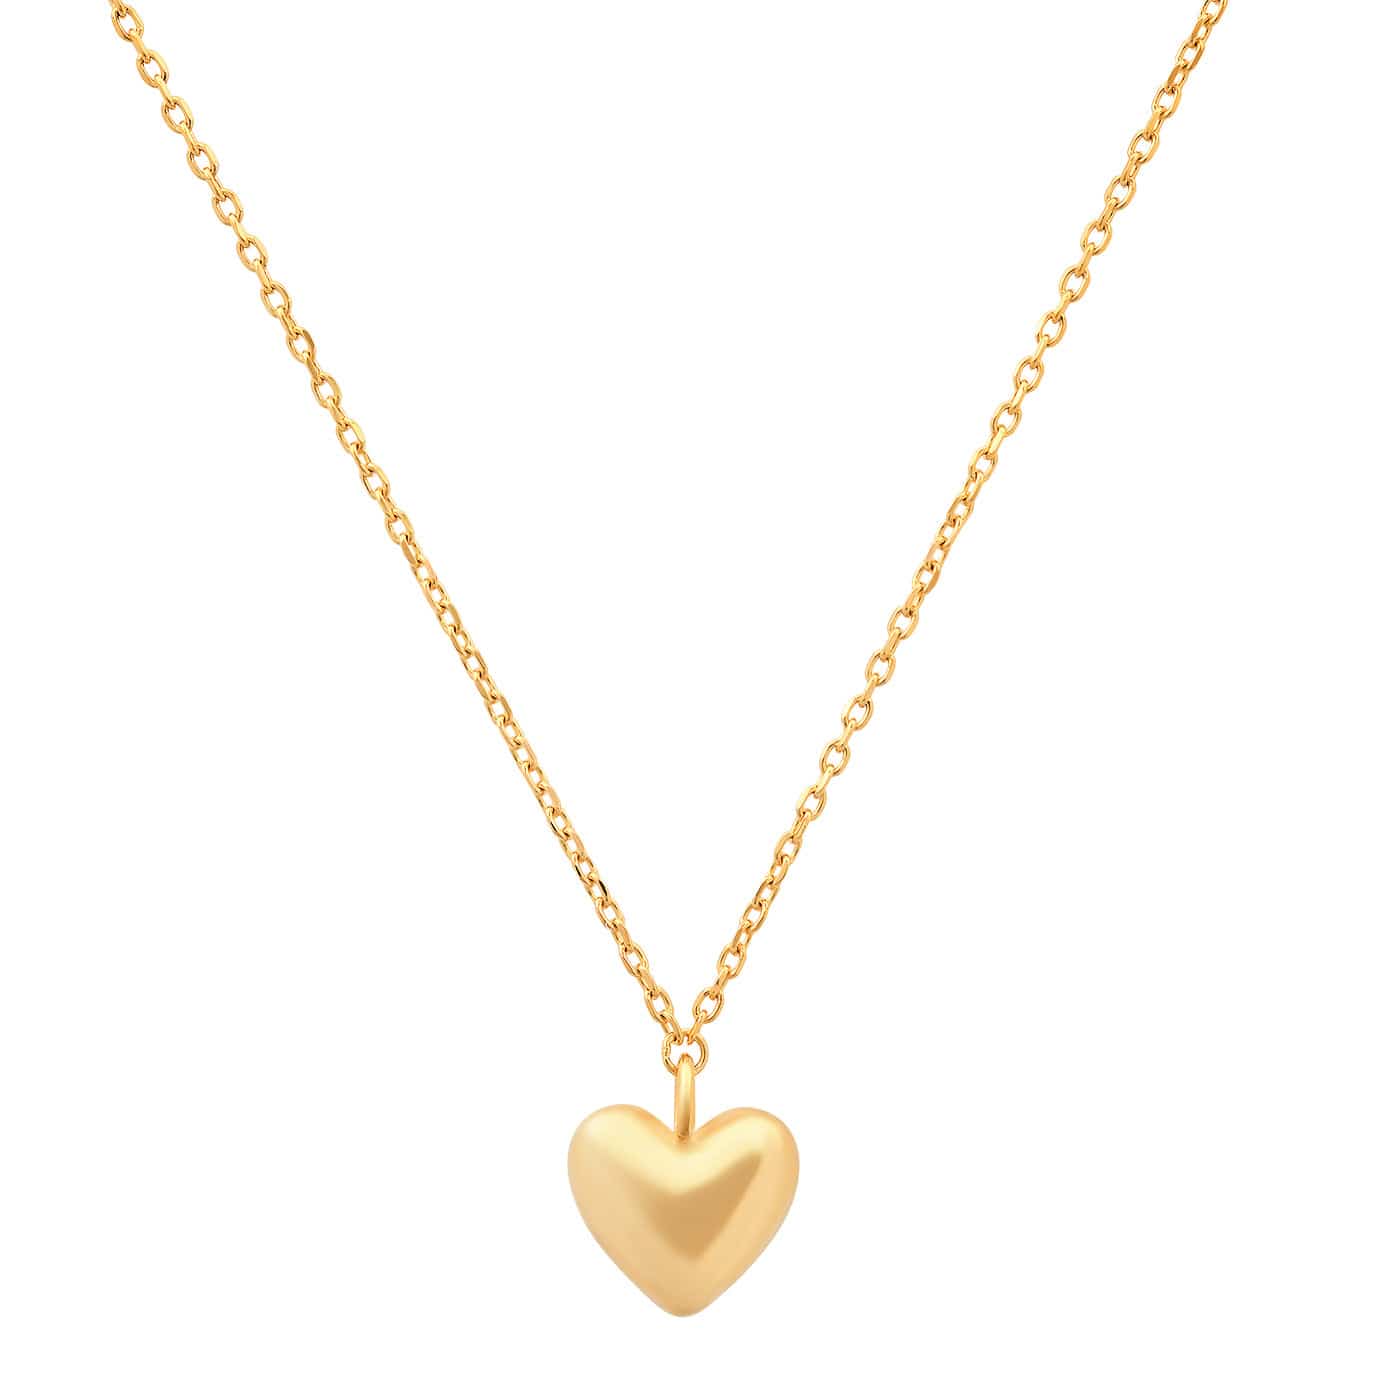 TAI JEWELRY Necklace Gold Vermeil Puffed Heart Pendant Necklace